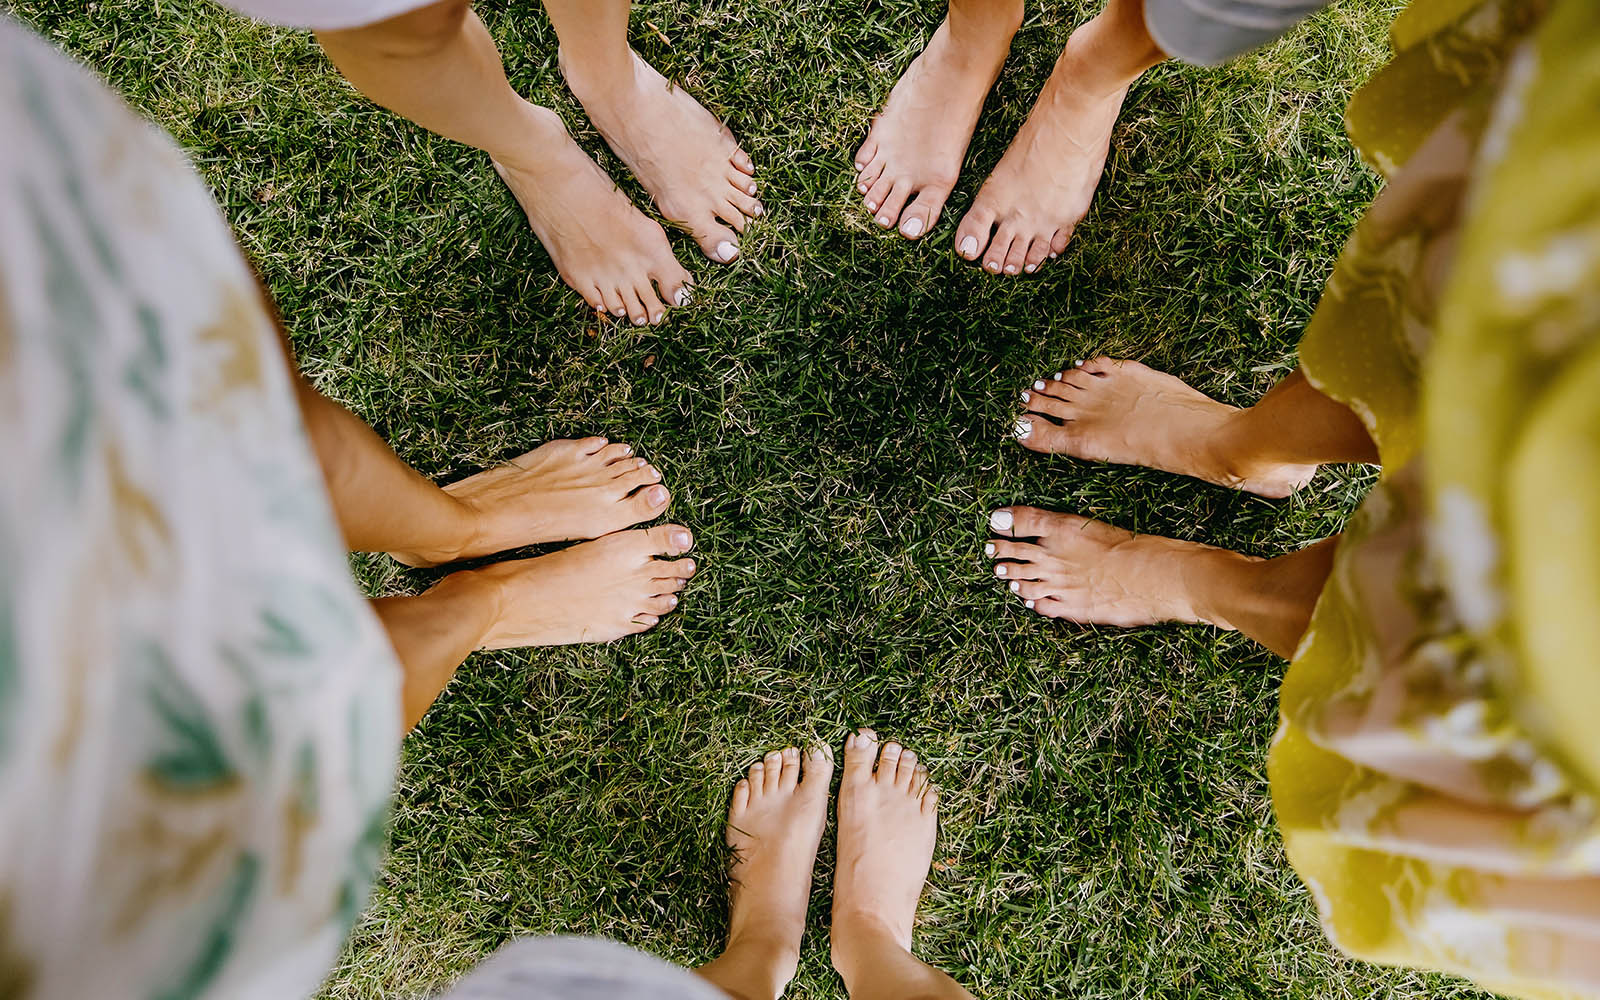 Bare feet forming circle on grass outdoors